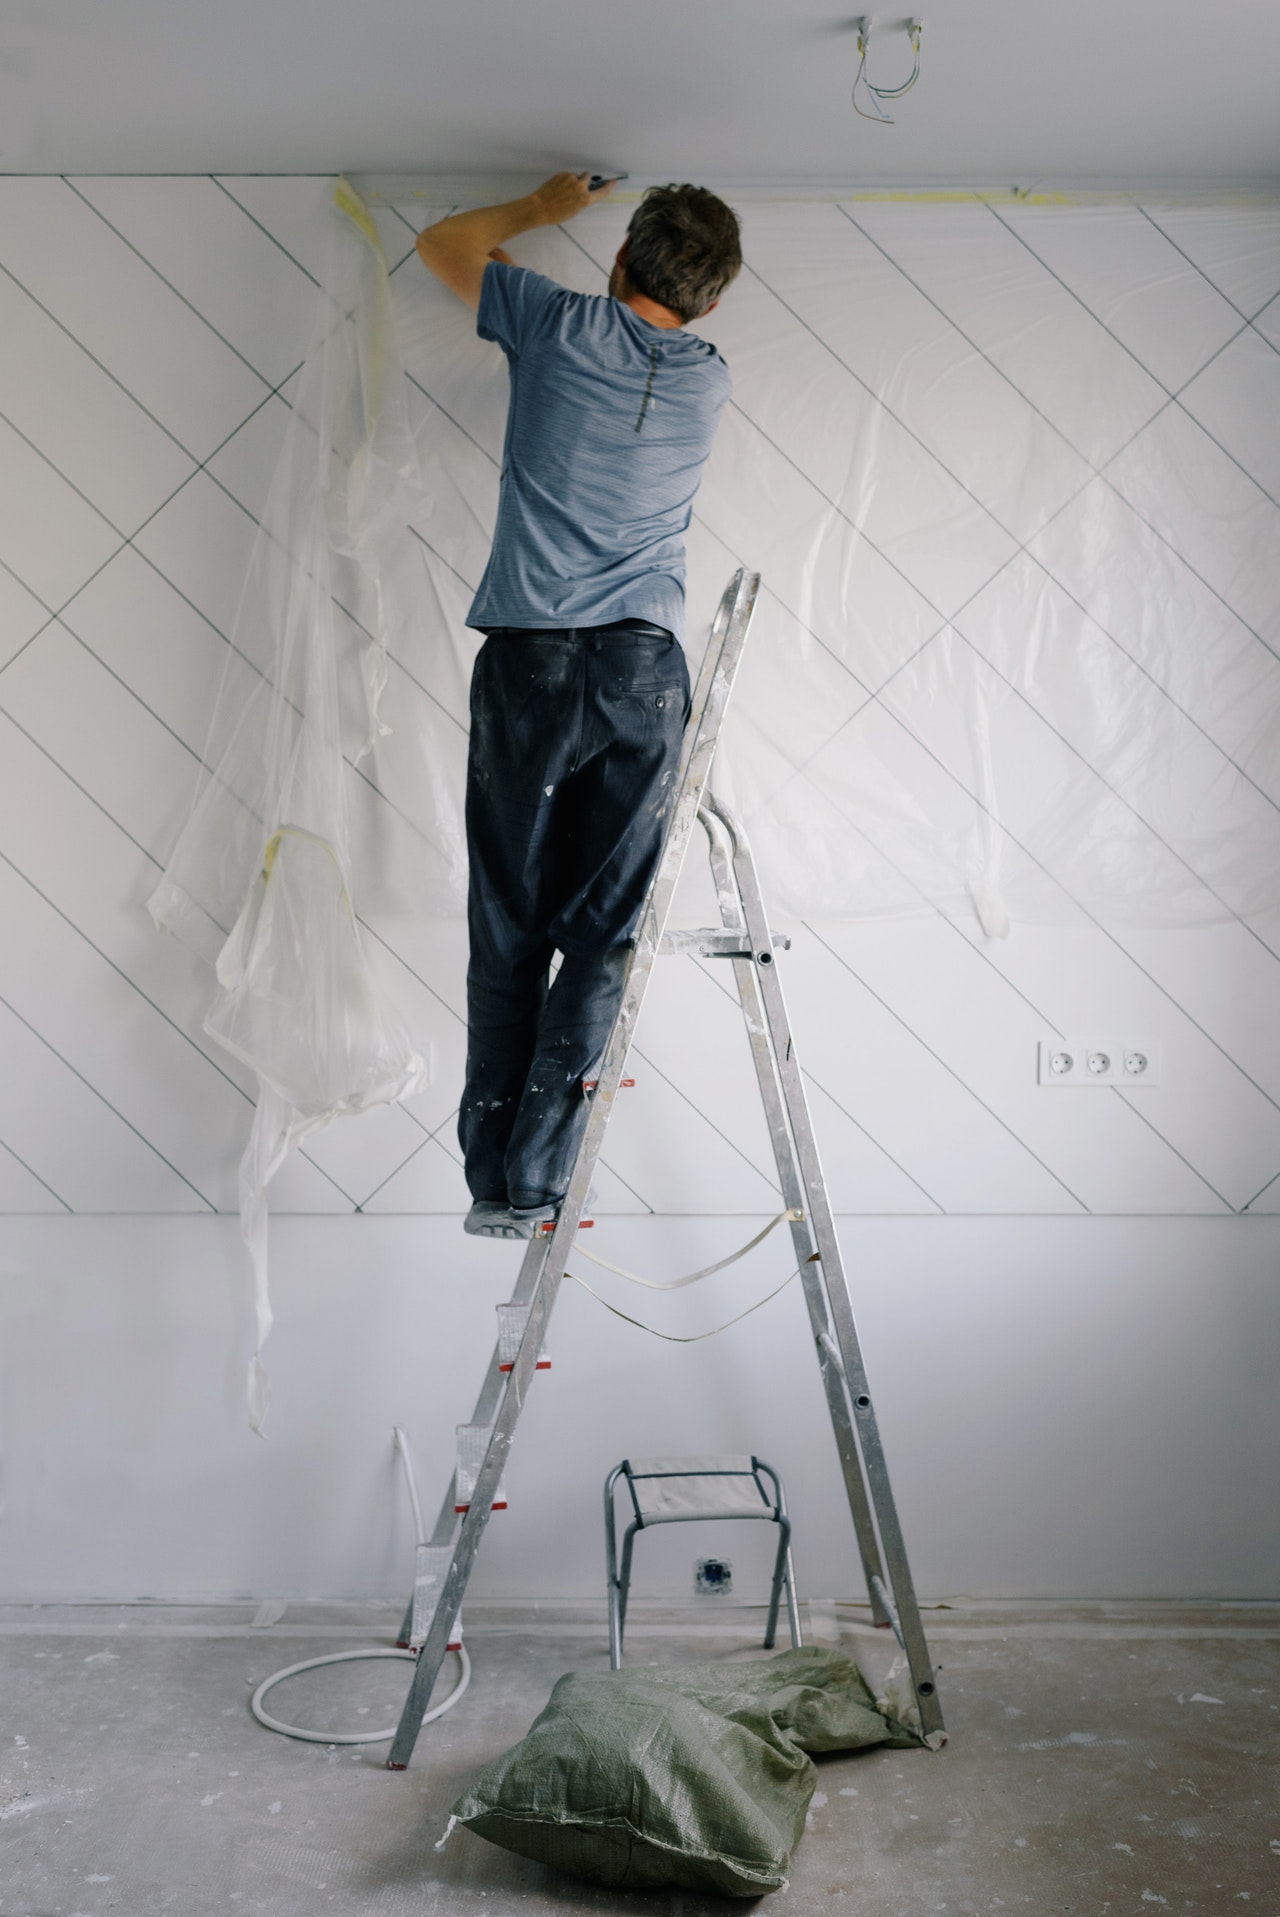 How to Repair Drywall Like a Pro​